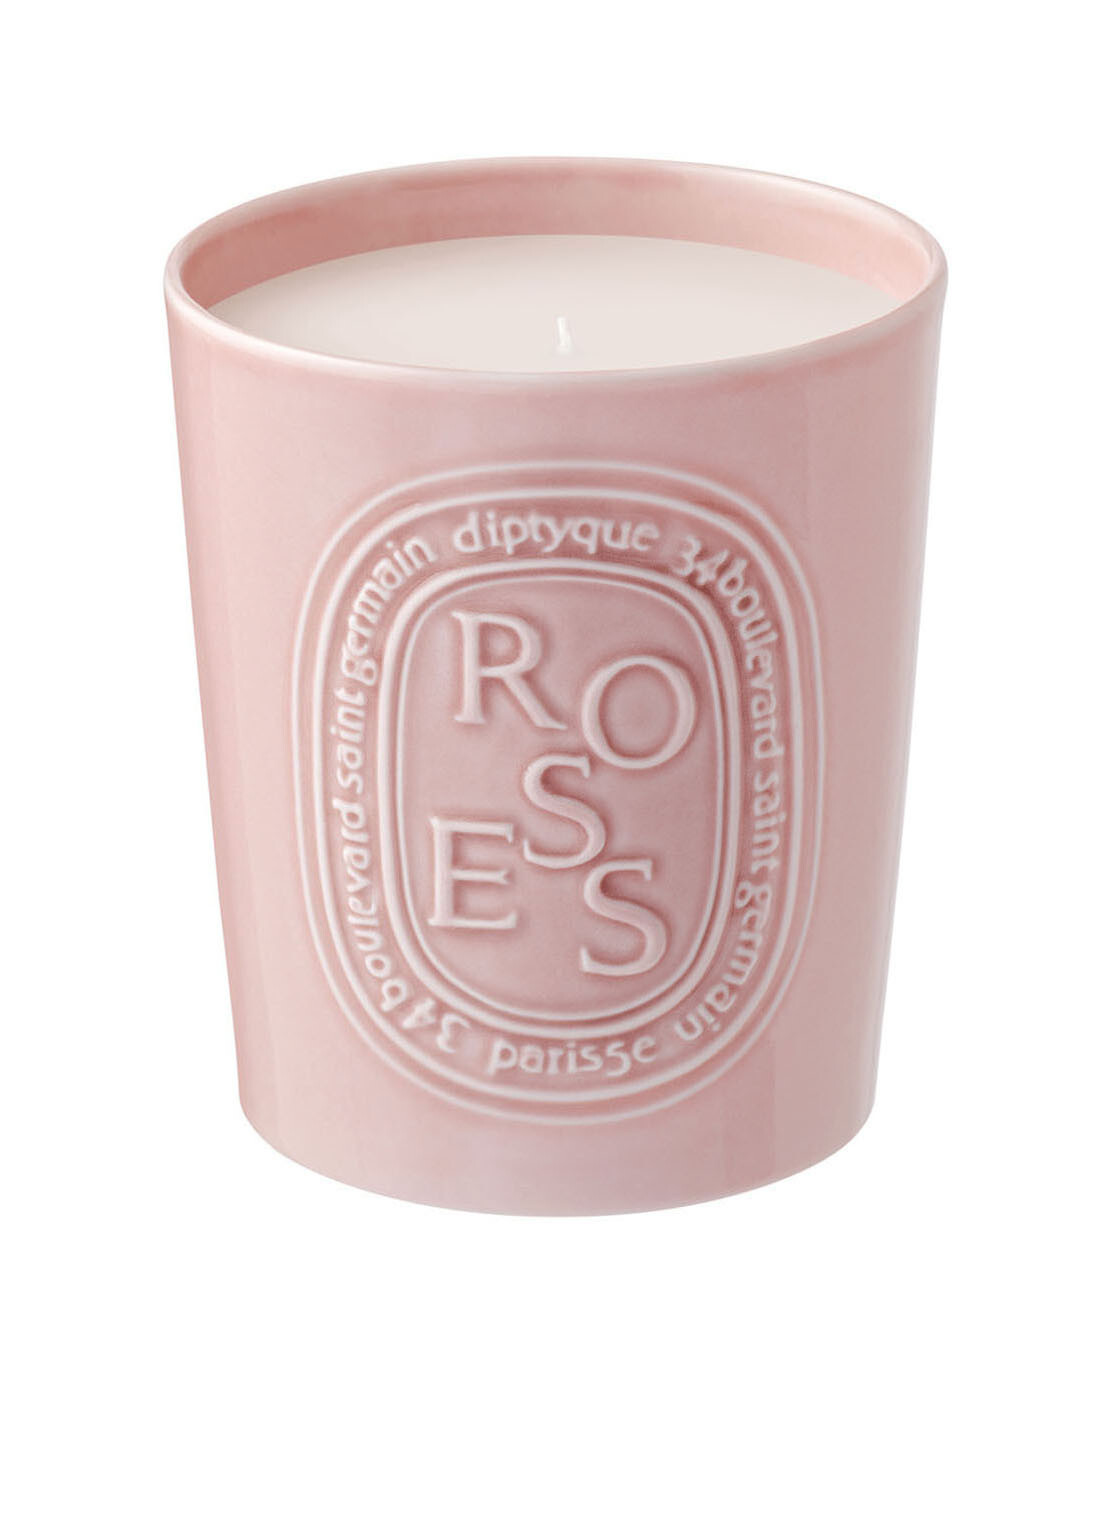 diptyque Roses Candle - Limited Edition geurkaars 600 gram